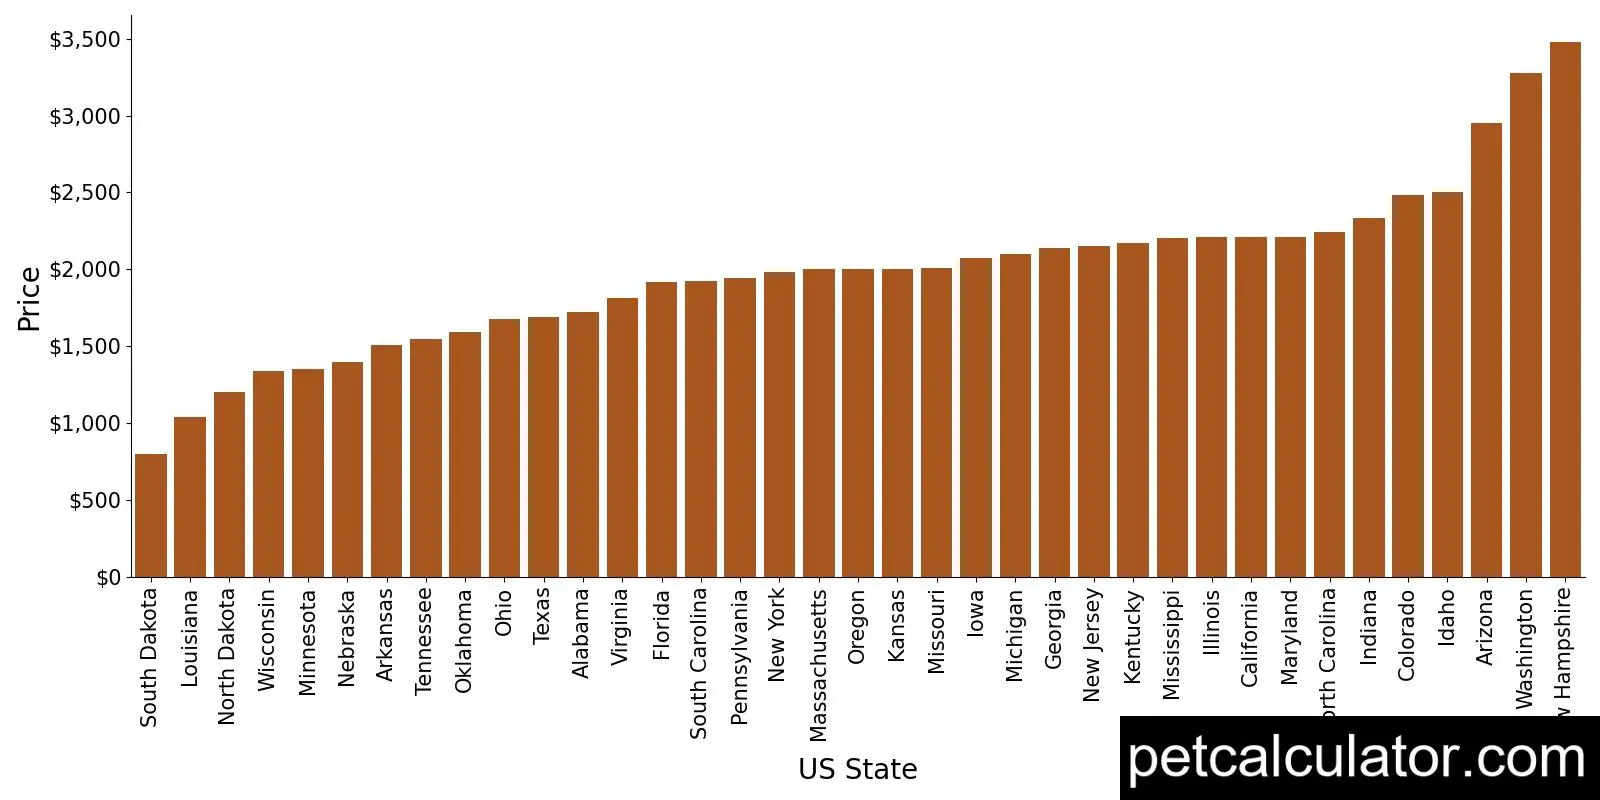 Price of Cockapoo by US State 